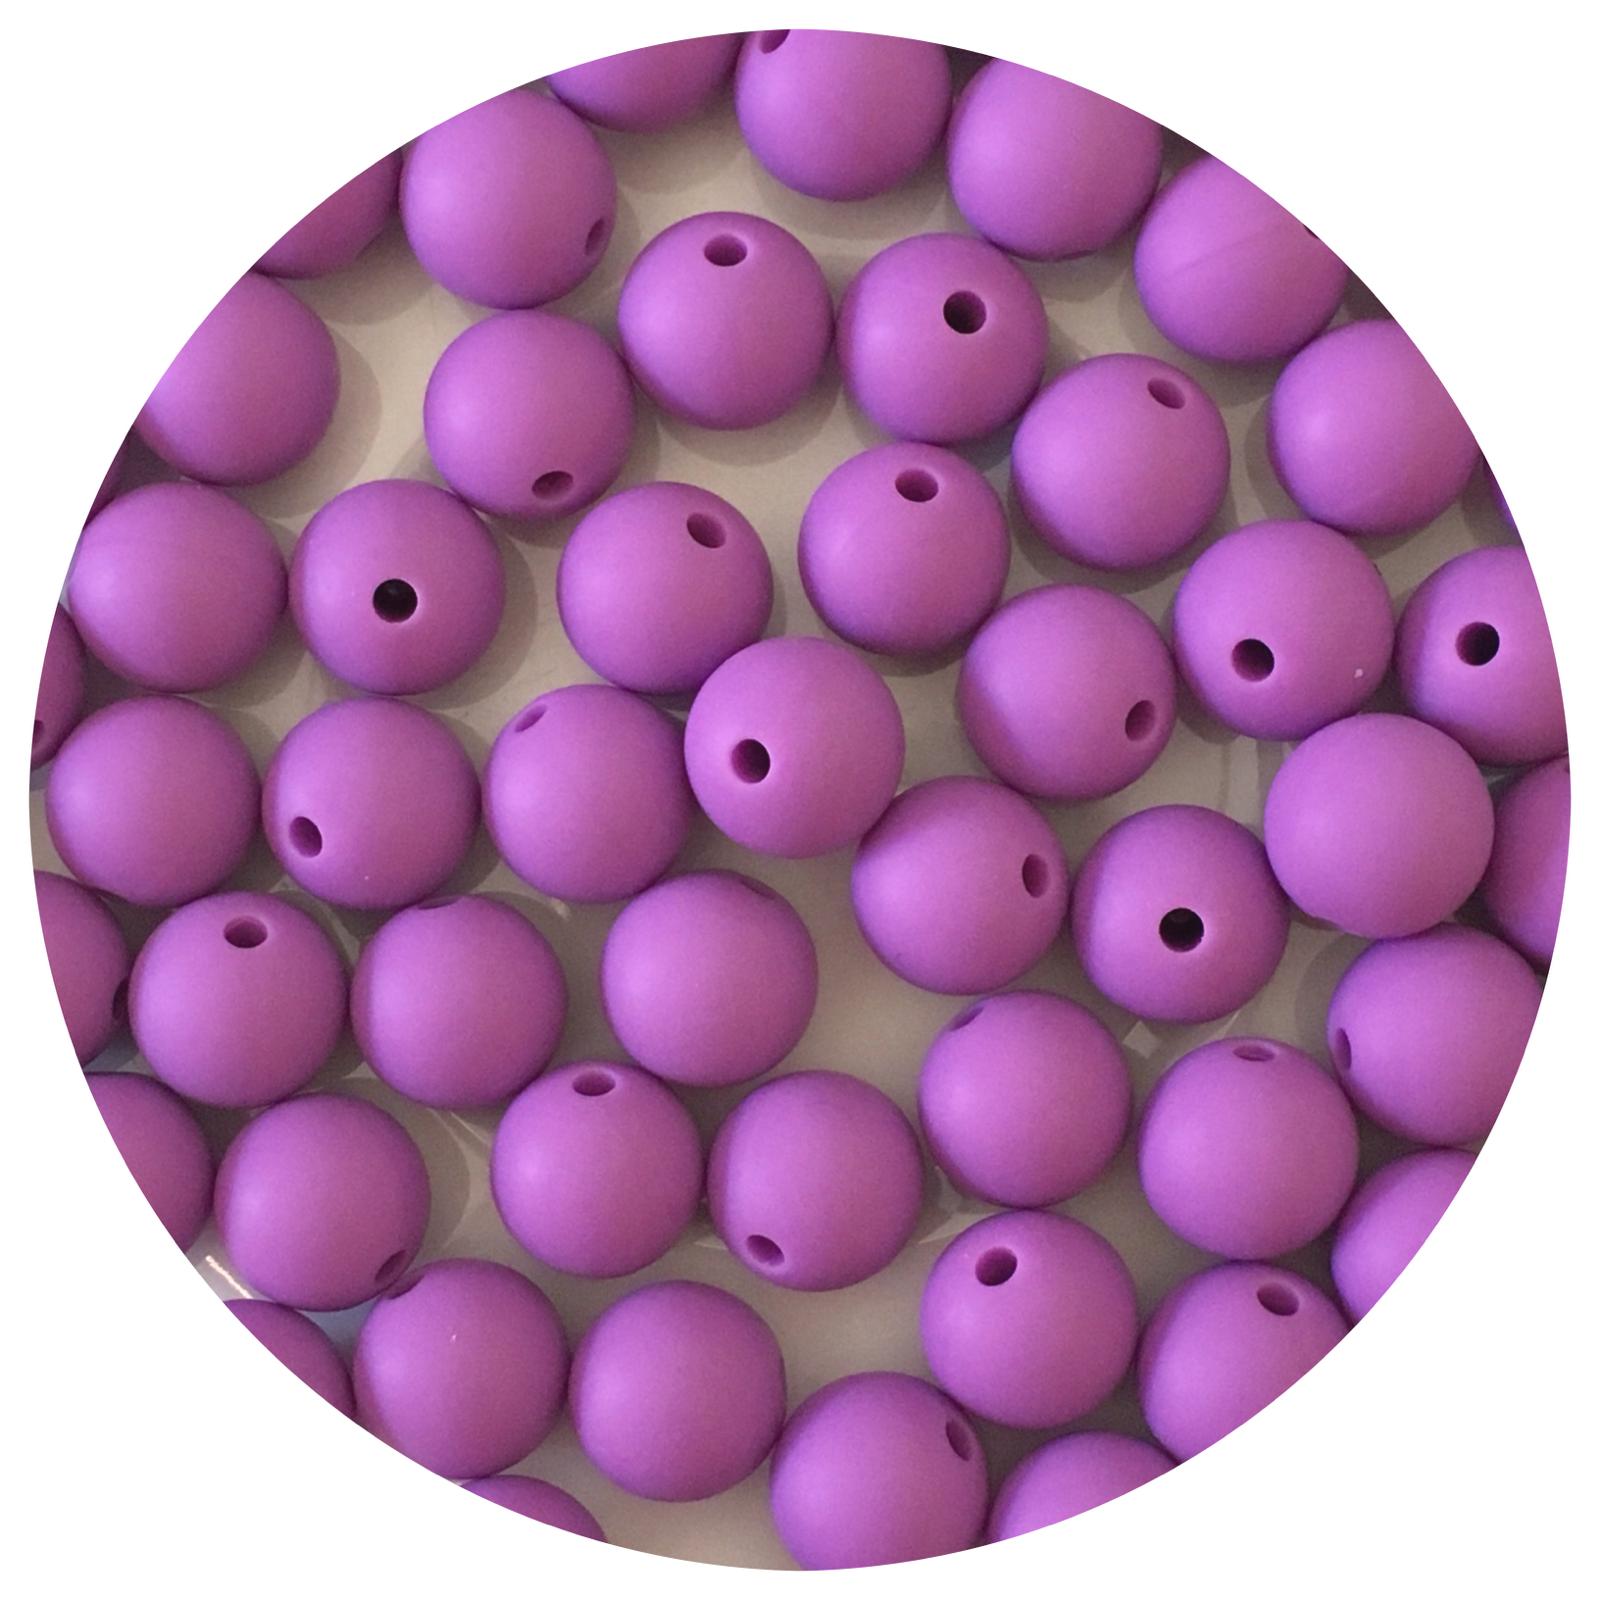 Lavender Purple - 12mm Round Silicone Beads - 10 beads